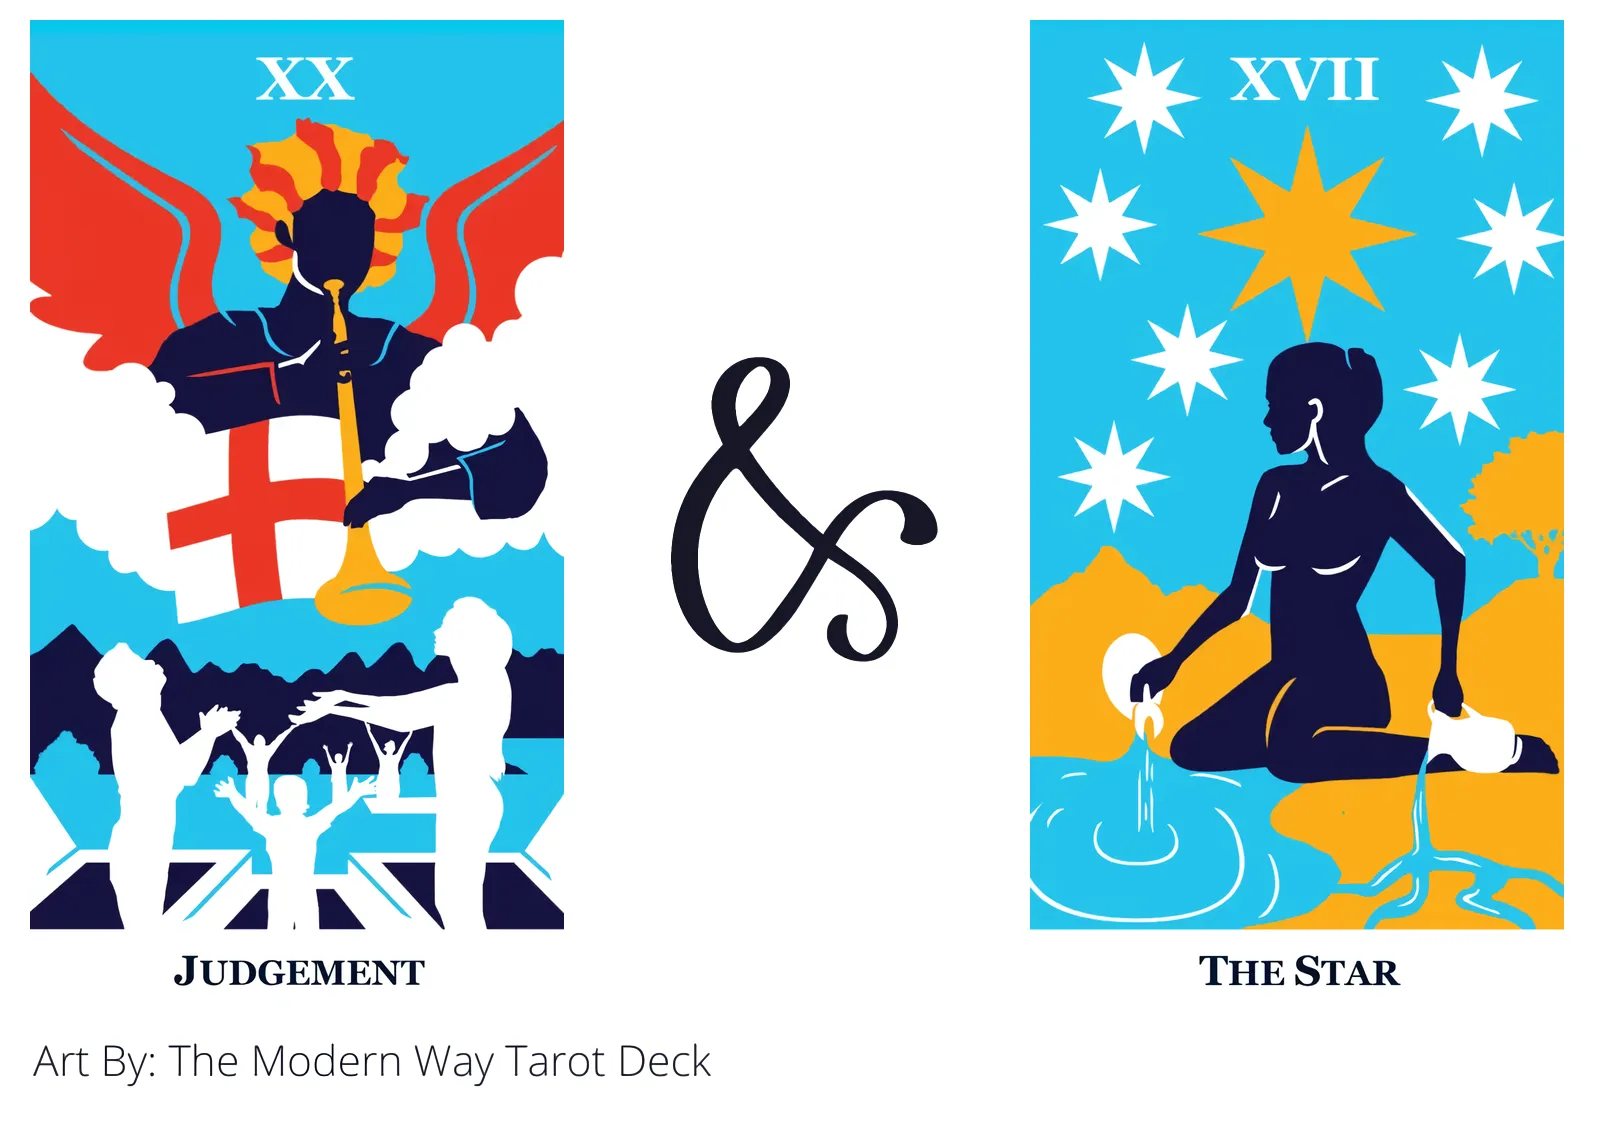 judgement and the star tarot cards together